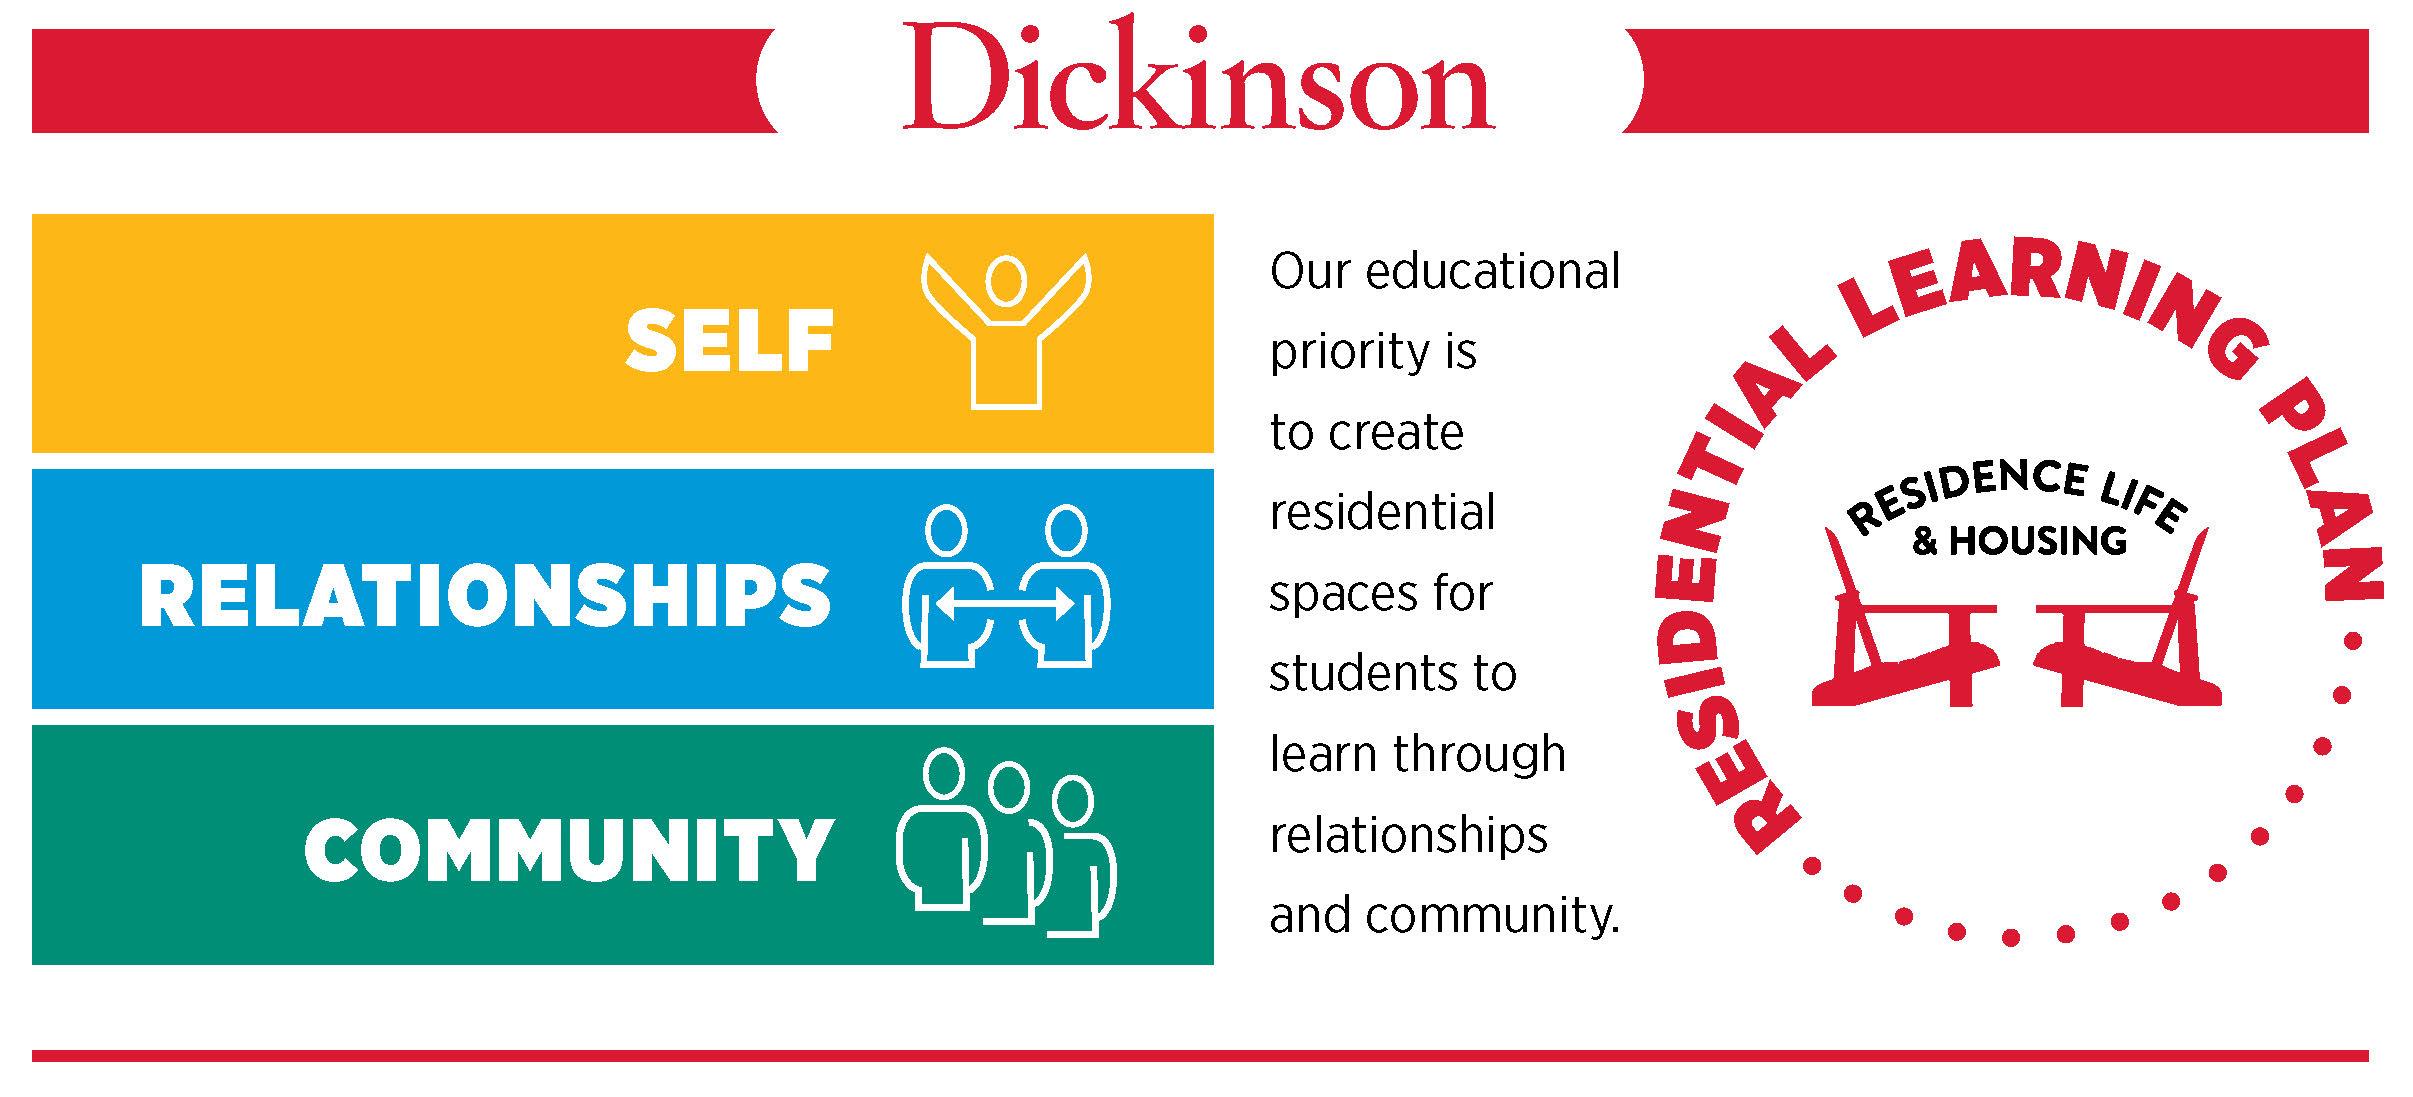 Image highlighting three learning goals for Residence Life & Housing:  self, relationships, and community.  